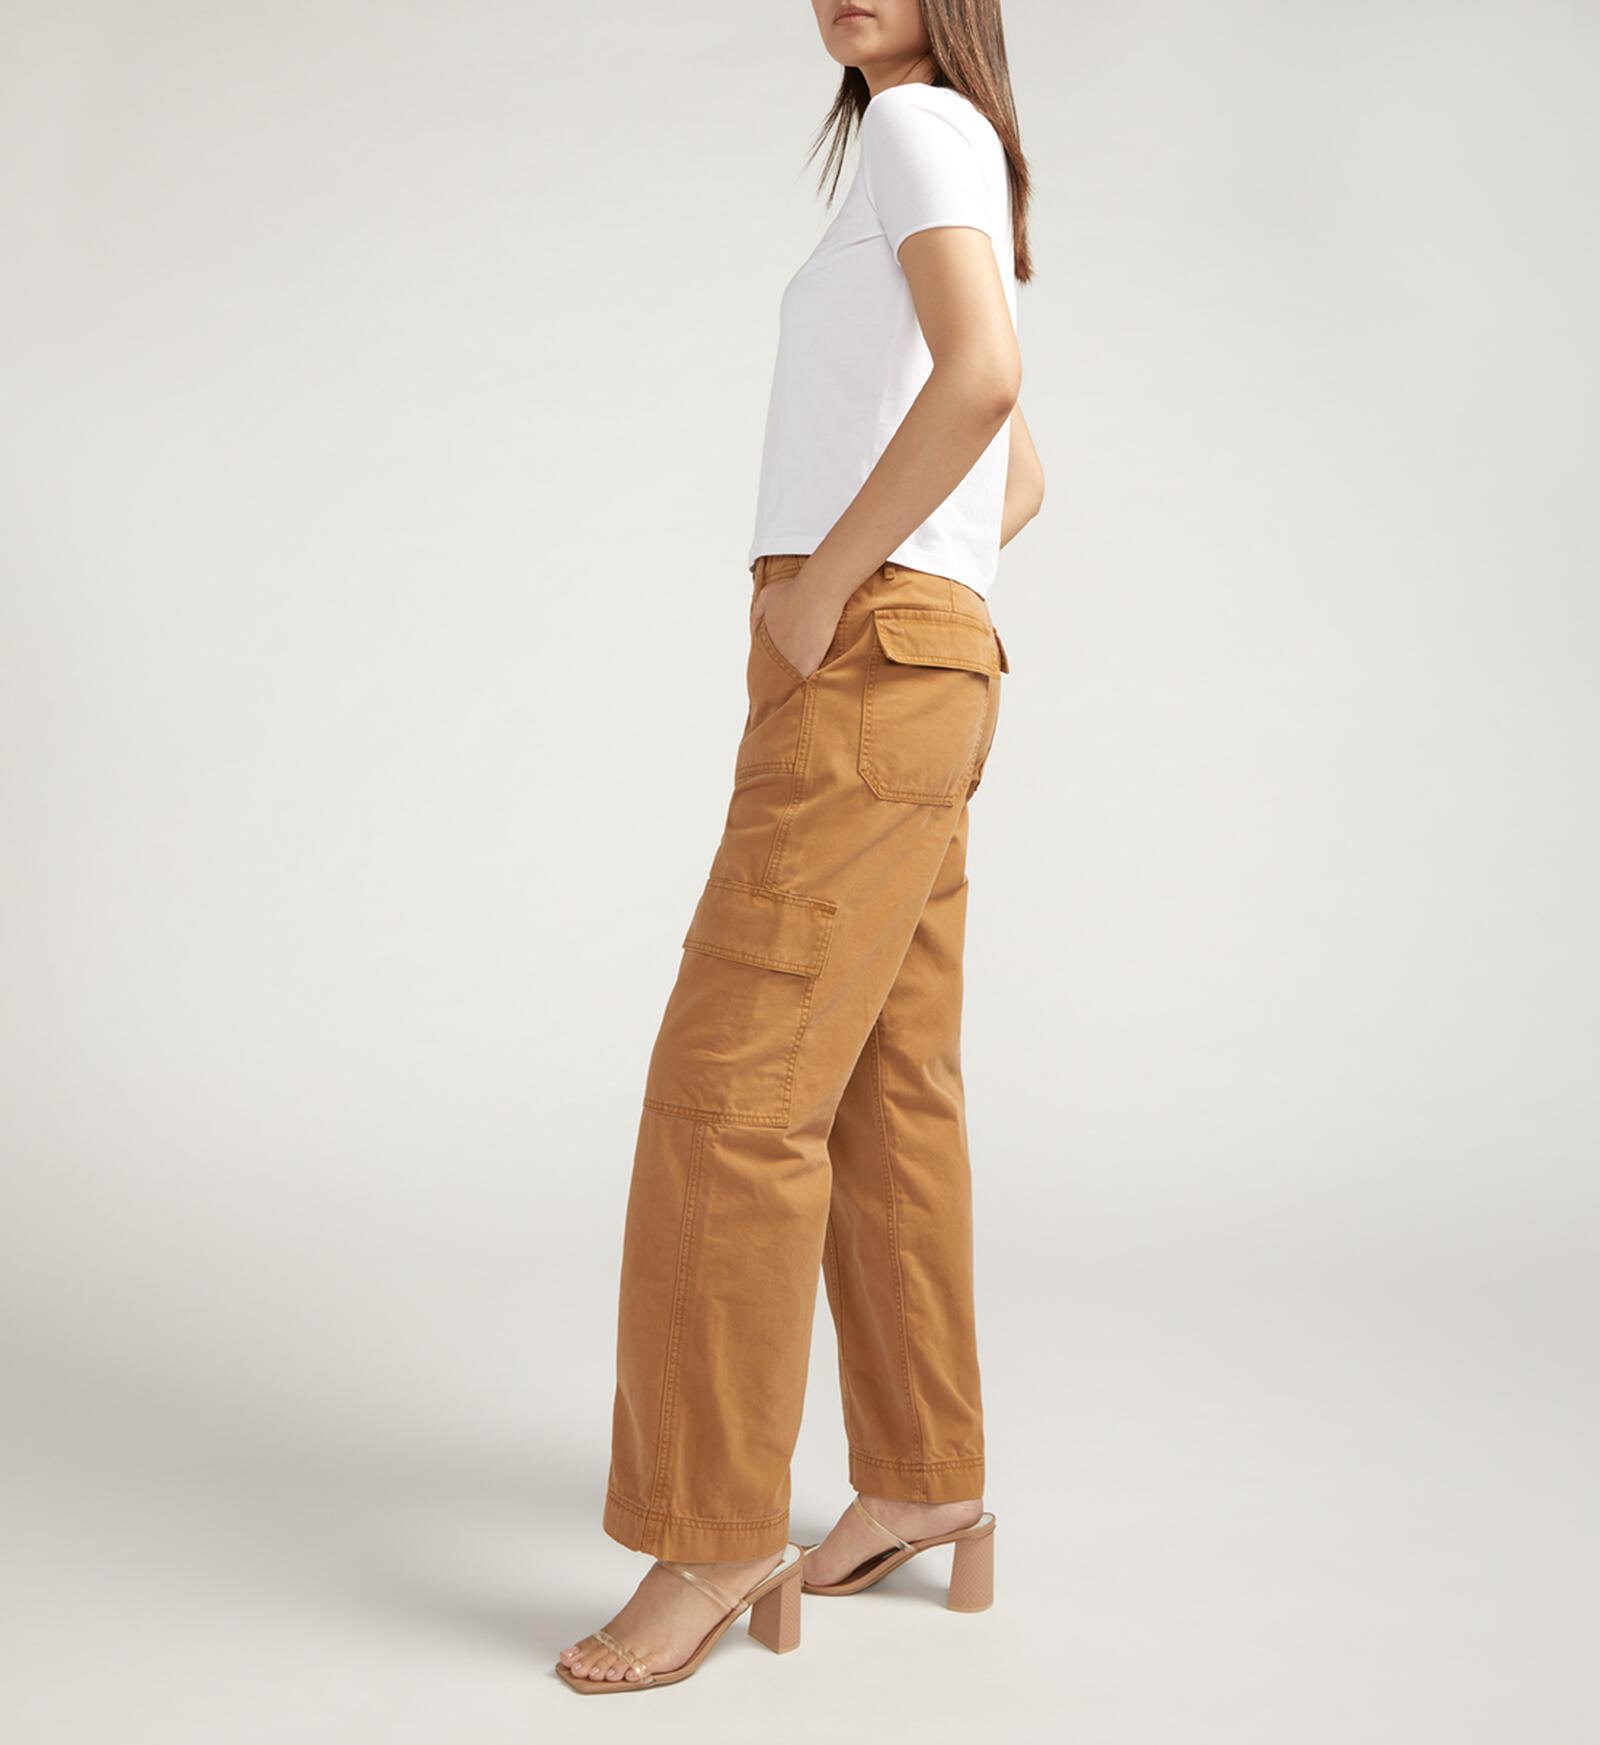 Buy Wide Leg Utility Cargo Pant for USD 74.00